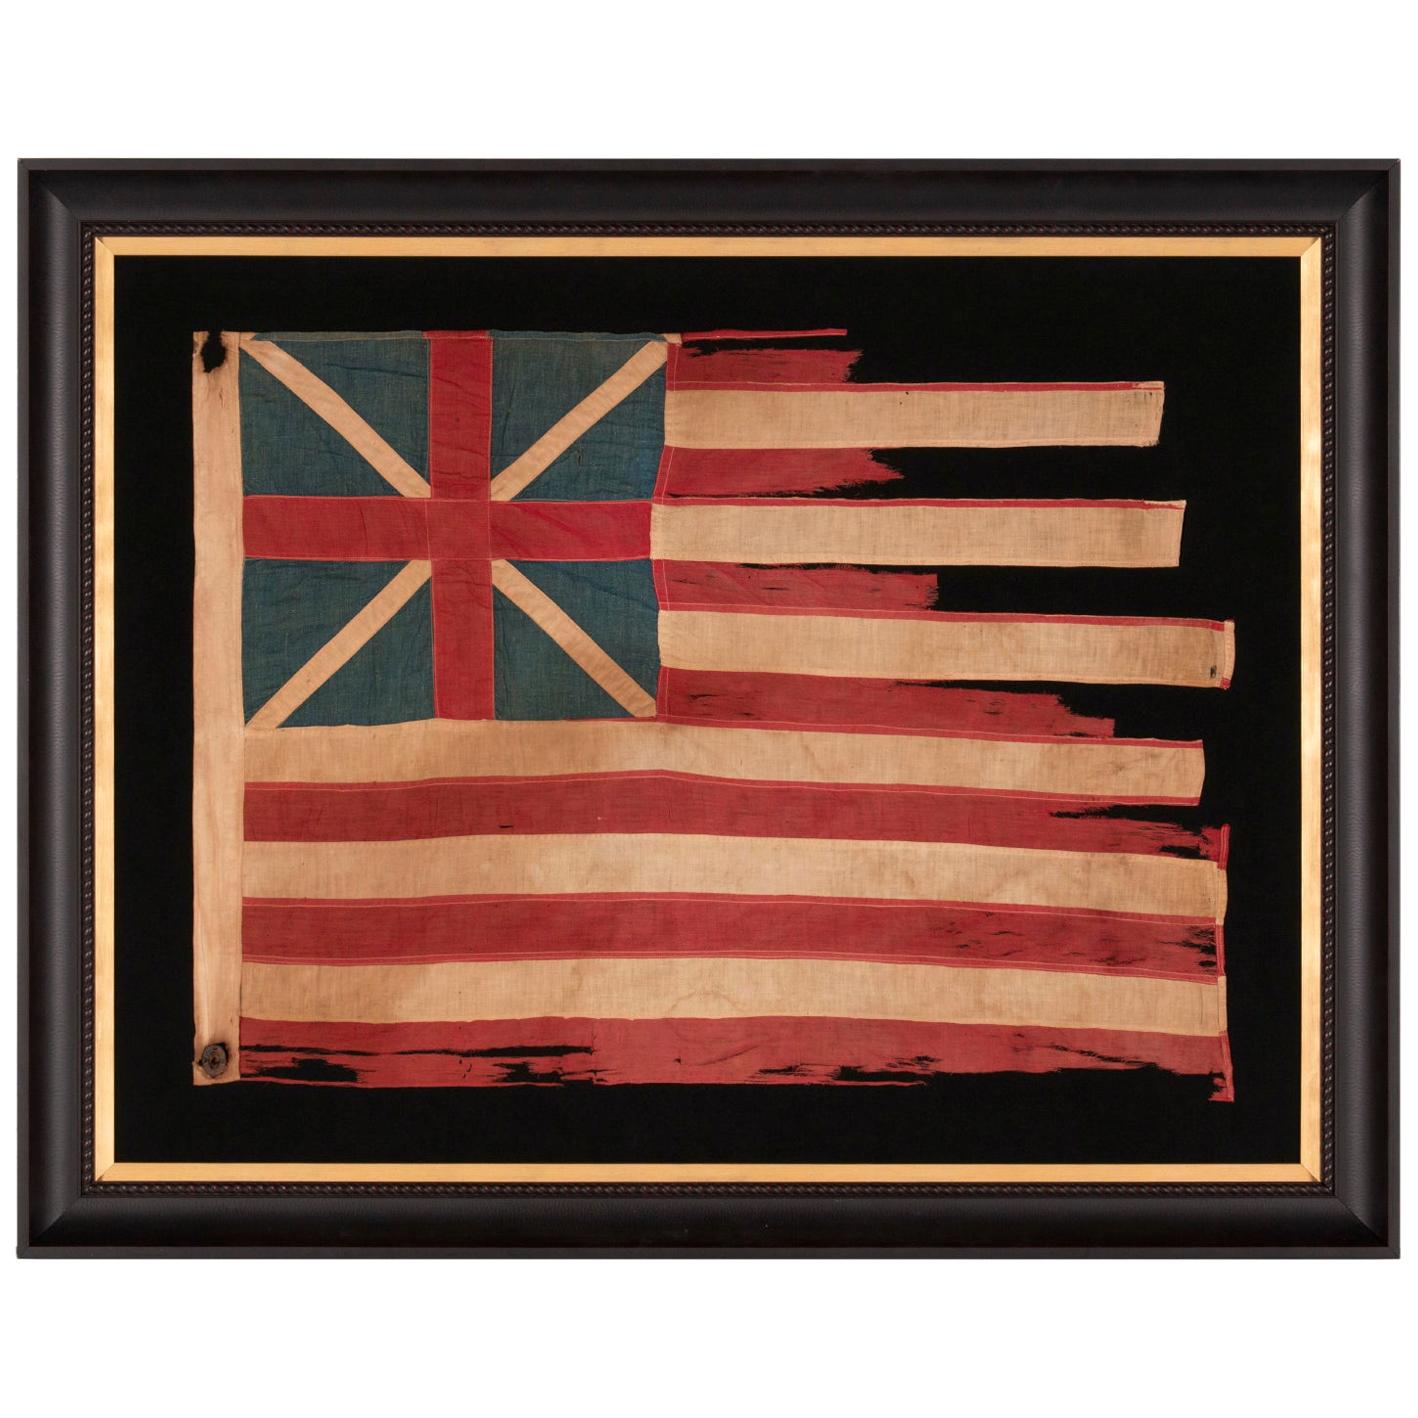 Early Example of the "Grand Union" American Flag, the First Flag of America